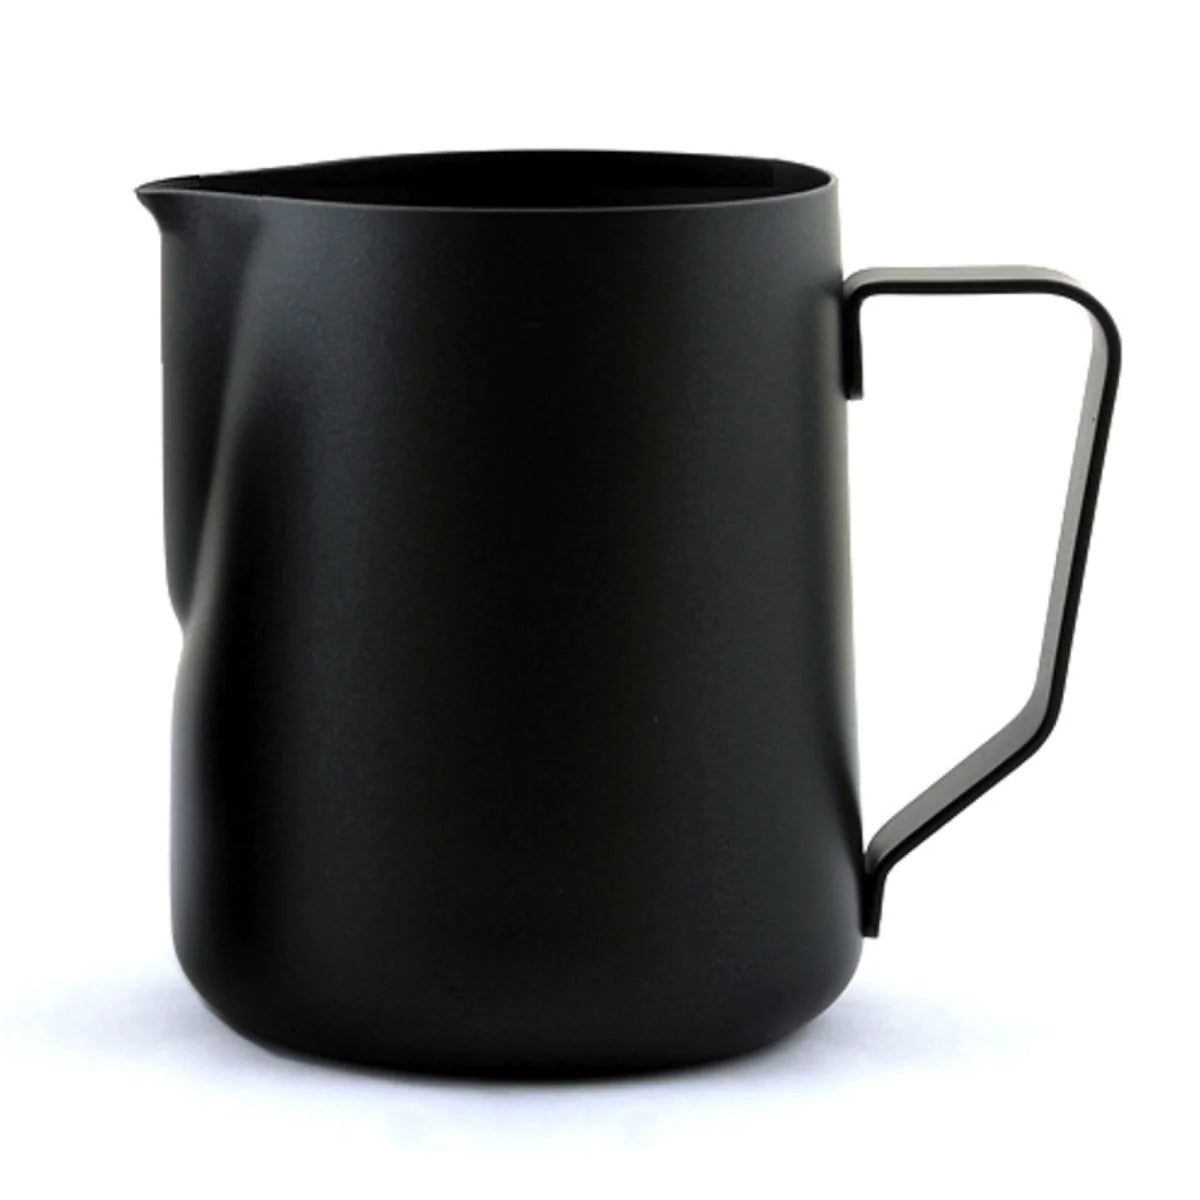 Milk frothing pitcher, 710 ml, black, by Café Culture